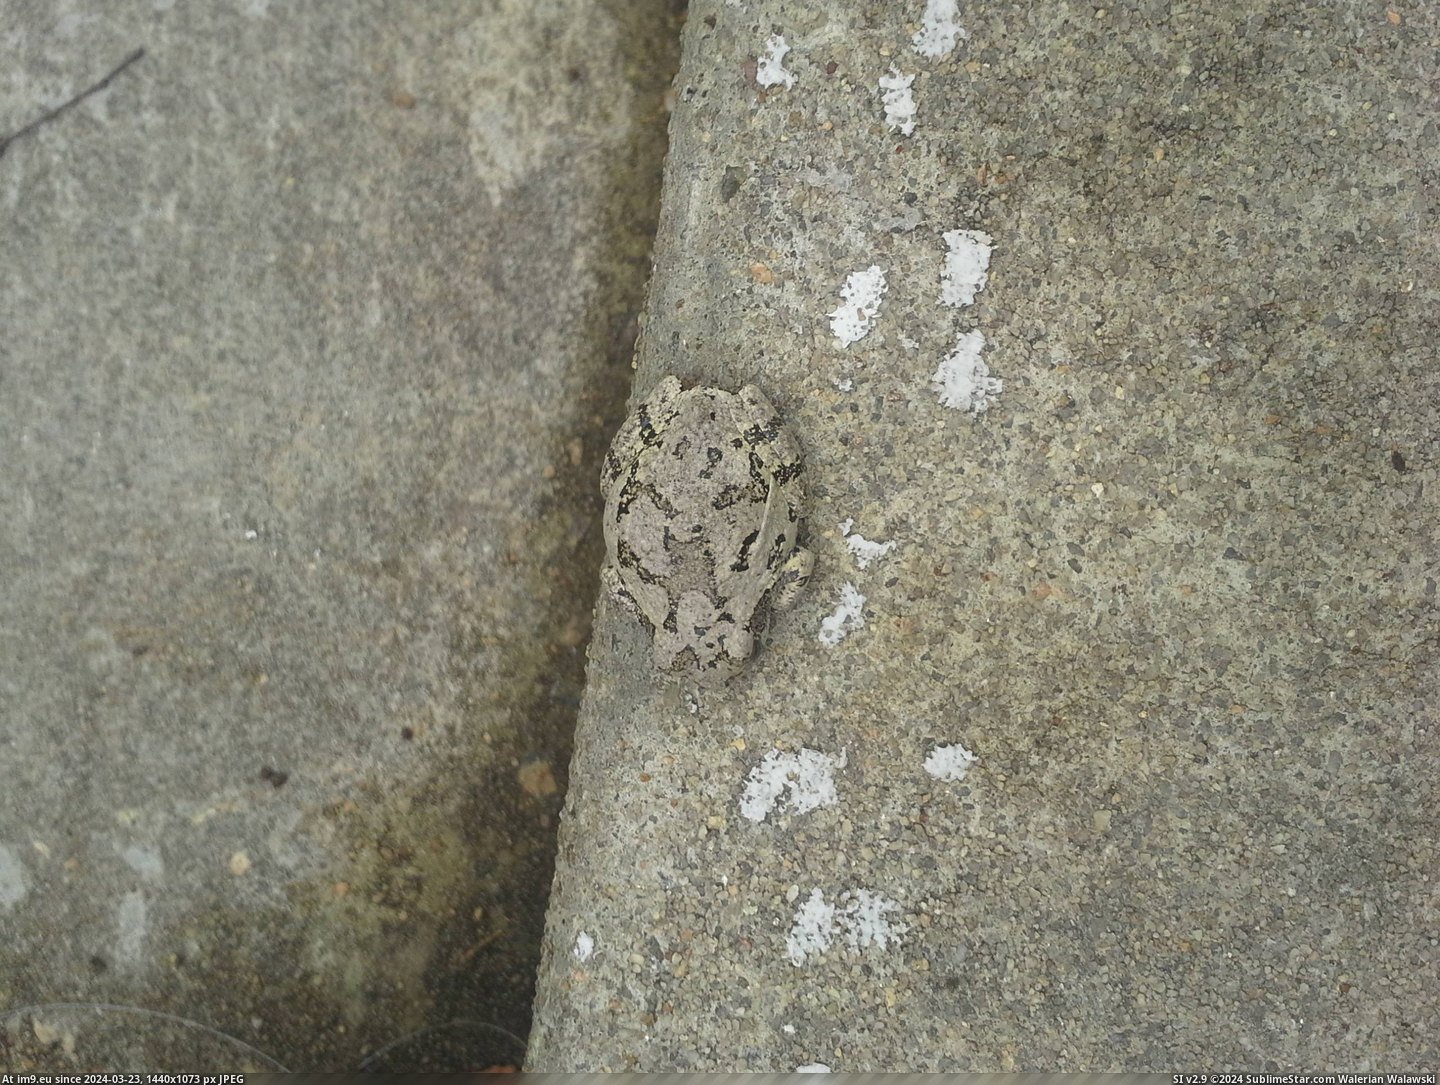 #Local #Any #Toad #Camouflaged #Sidewalk #Fauna [Mildlyinteresting] This toad is better camouflaged on the sidewalk than in any of the local fauna. Pic. (Image of album My r/MILDLYINTERESTING favs))